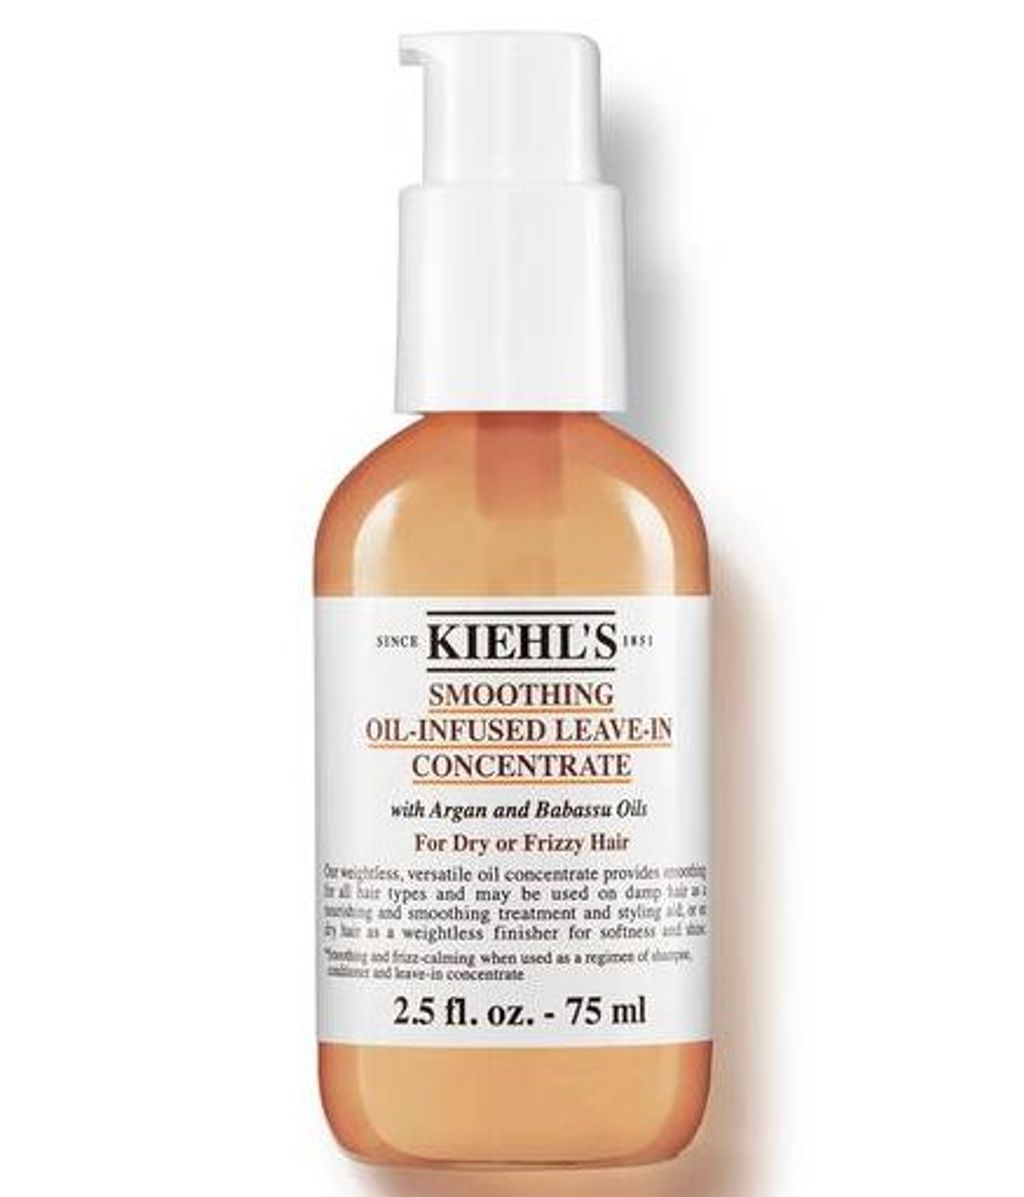 Smoothing Oil-Infused Leave-In Concentrate de Kiehl's